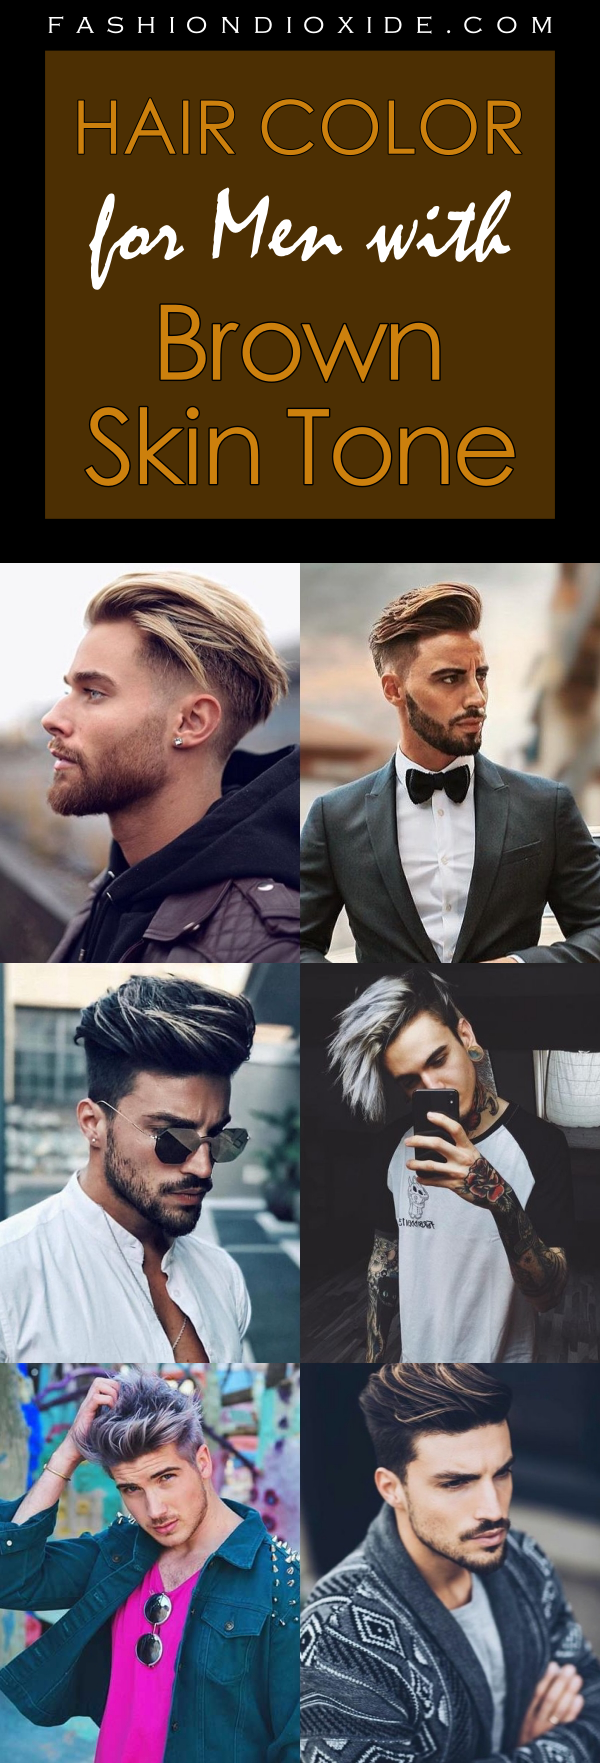 Men Find This Hair / Eye Color Combo Sexiest & Most Attractive | YourTango